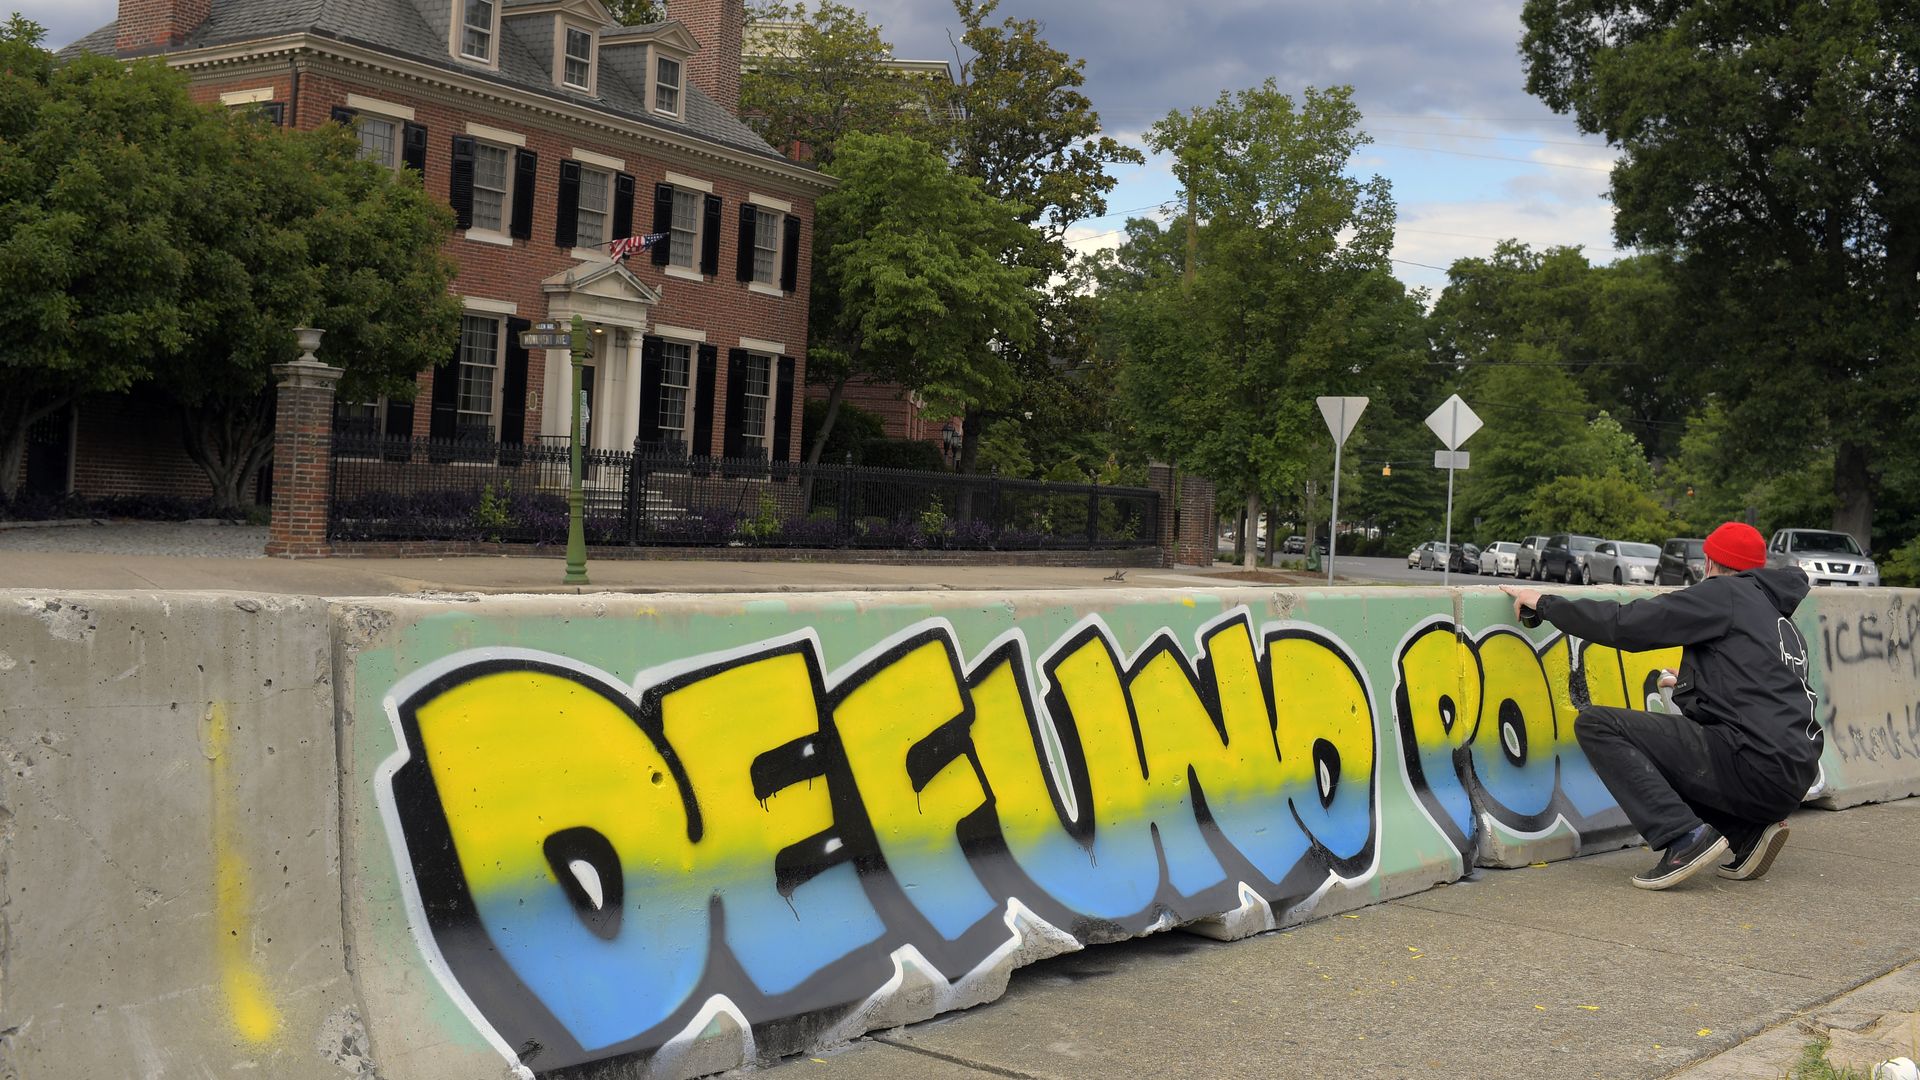 A street artist painting a "defund police" piece